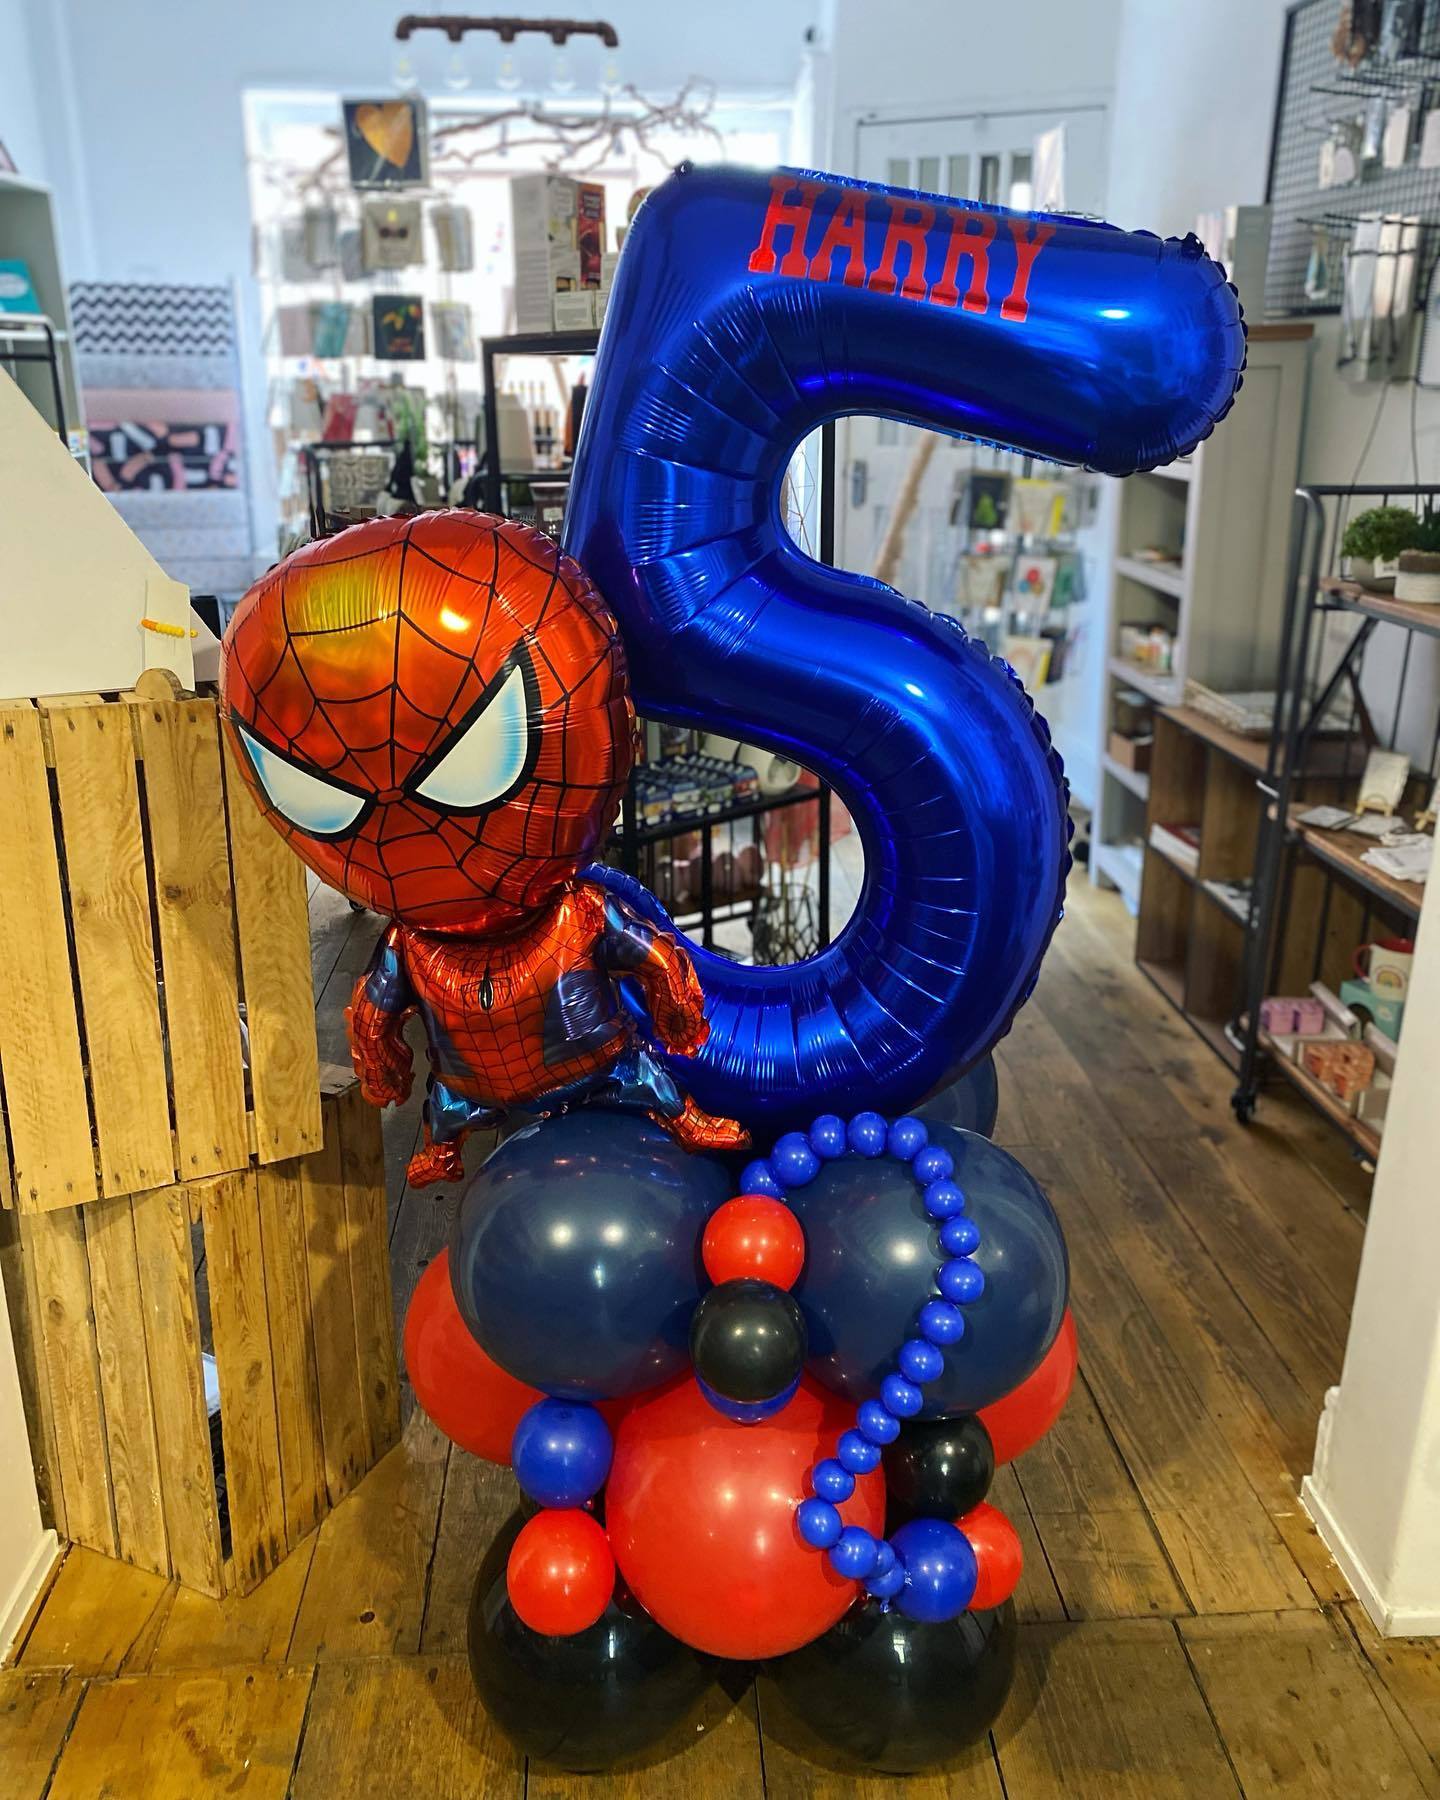 Spiderman balloons are a popular choice for childrens parties